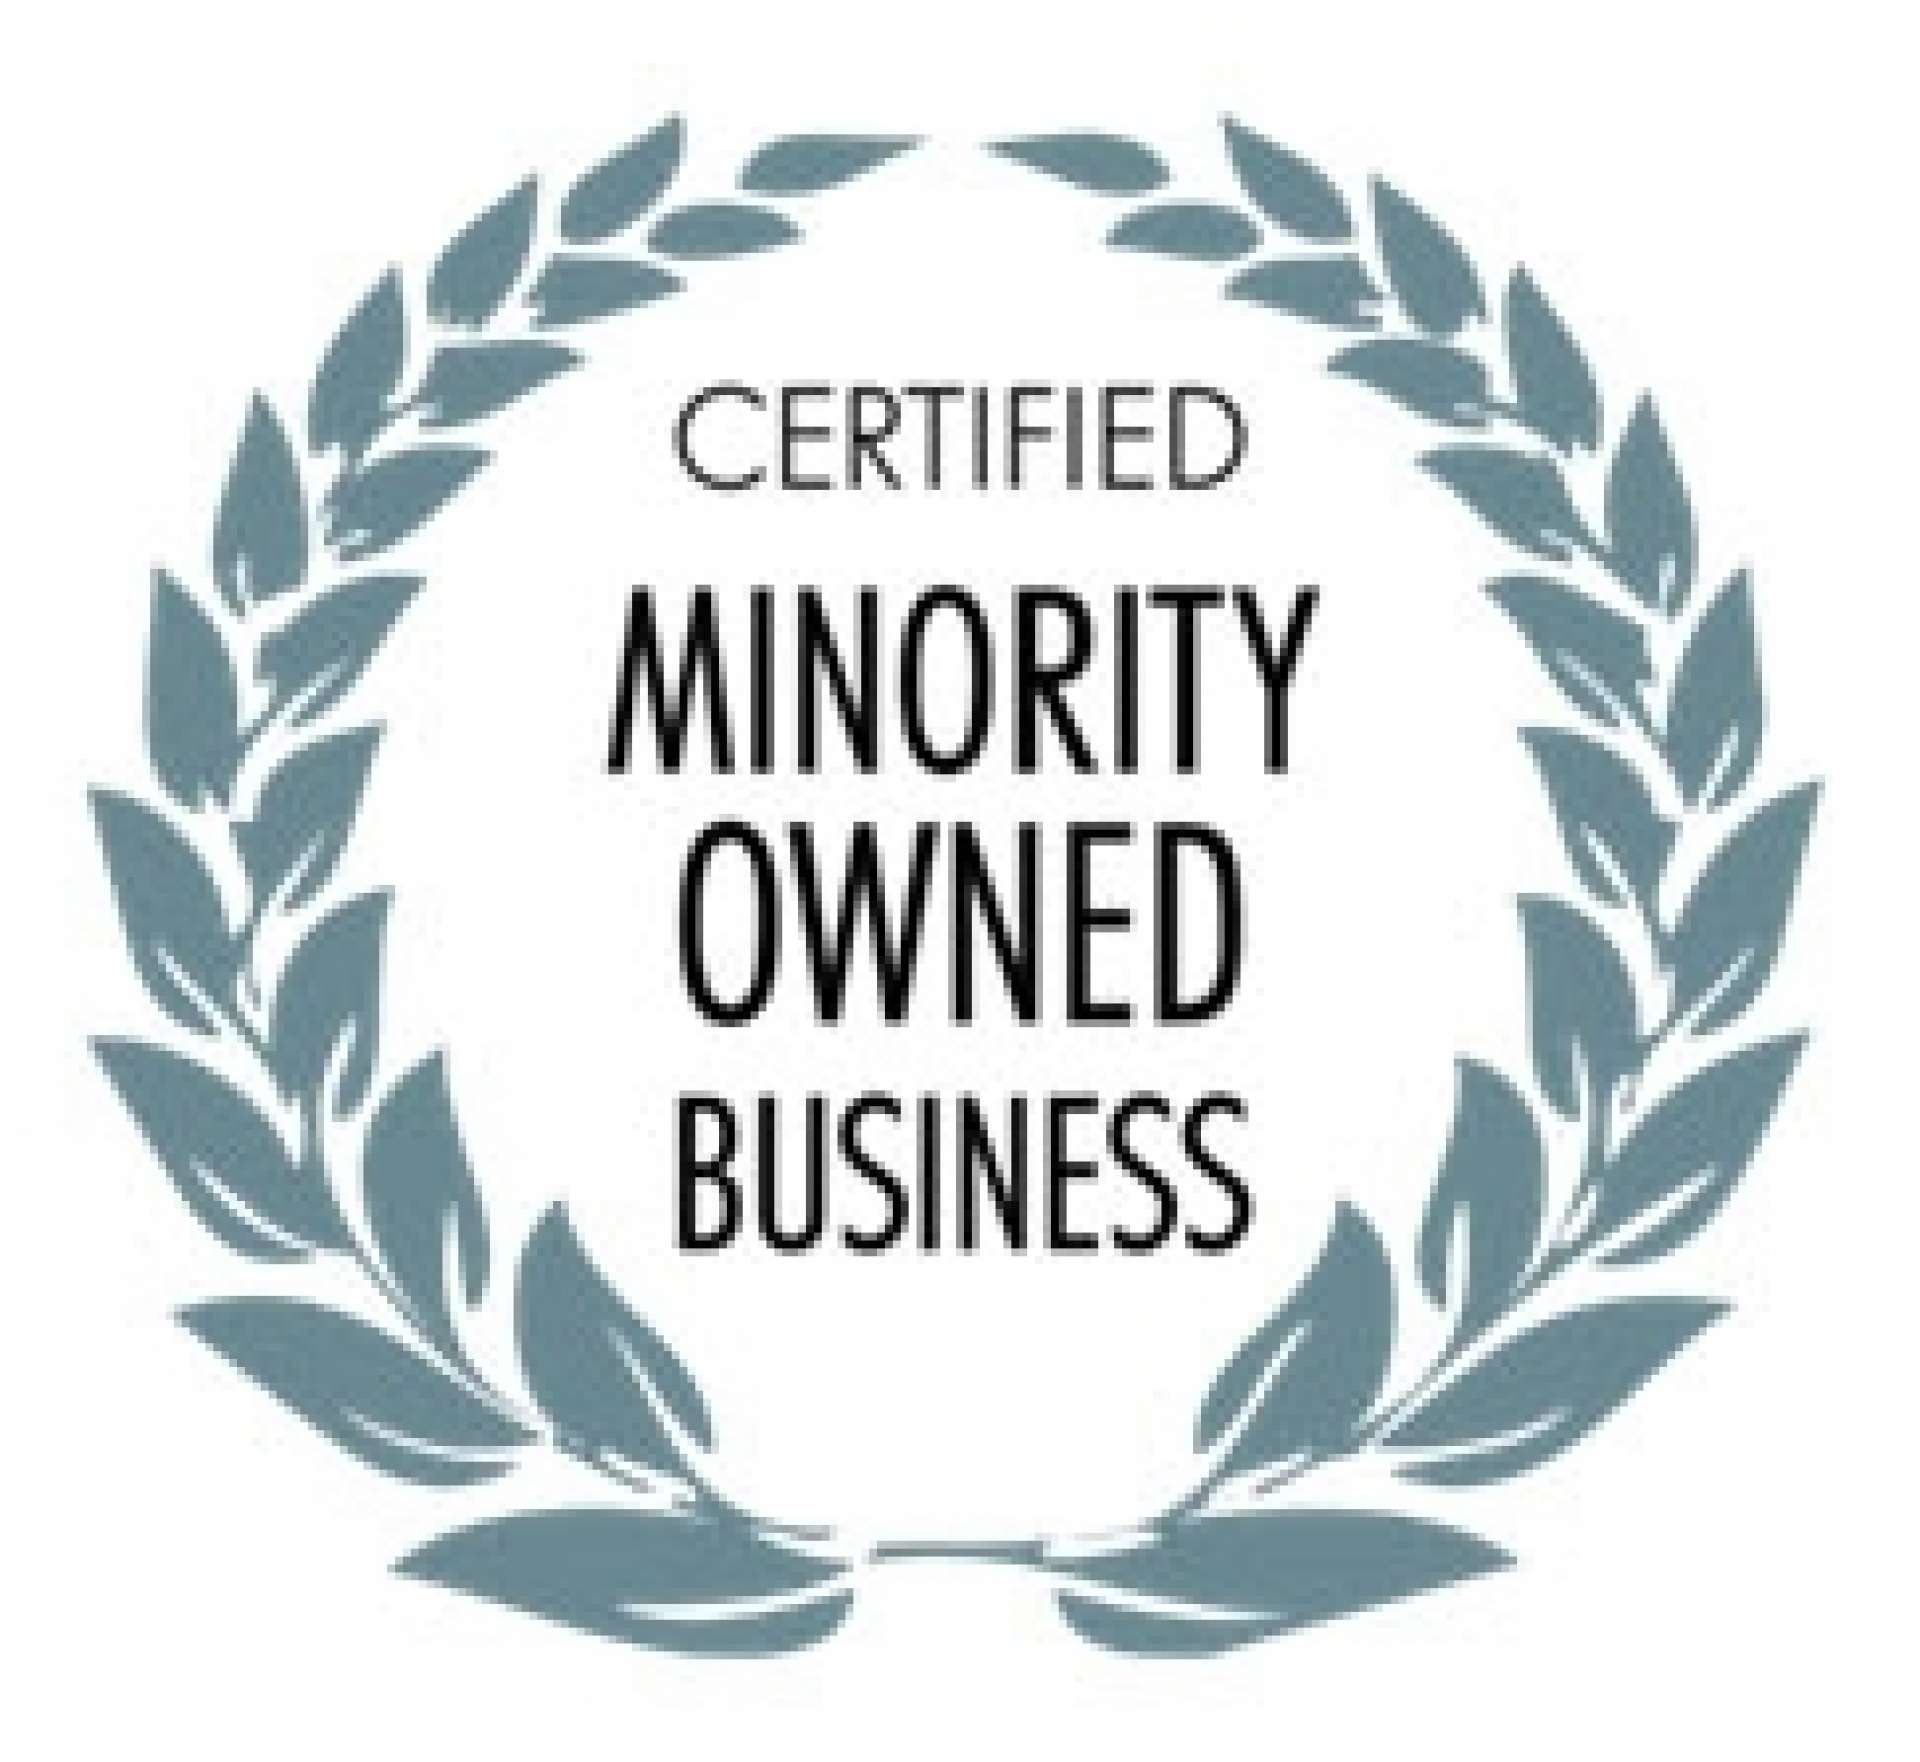 Certified minority owned business